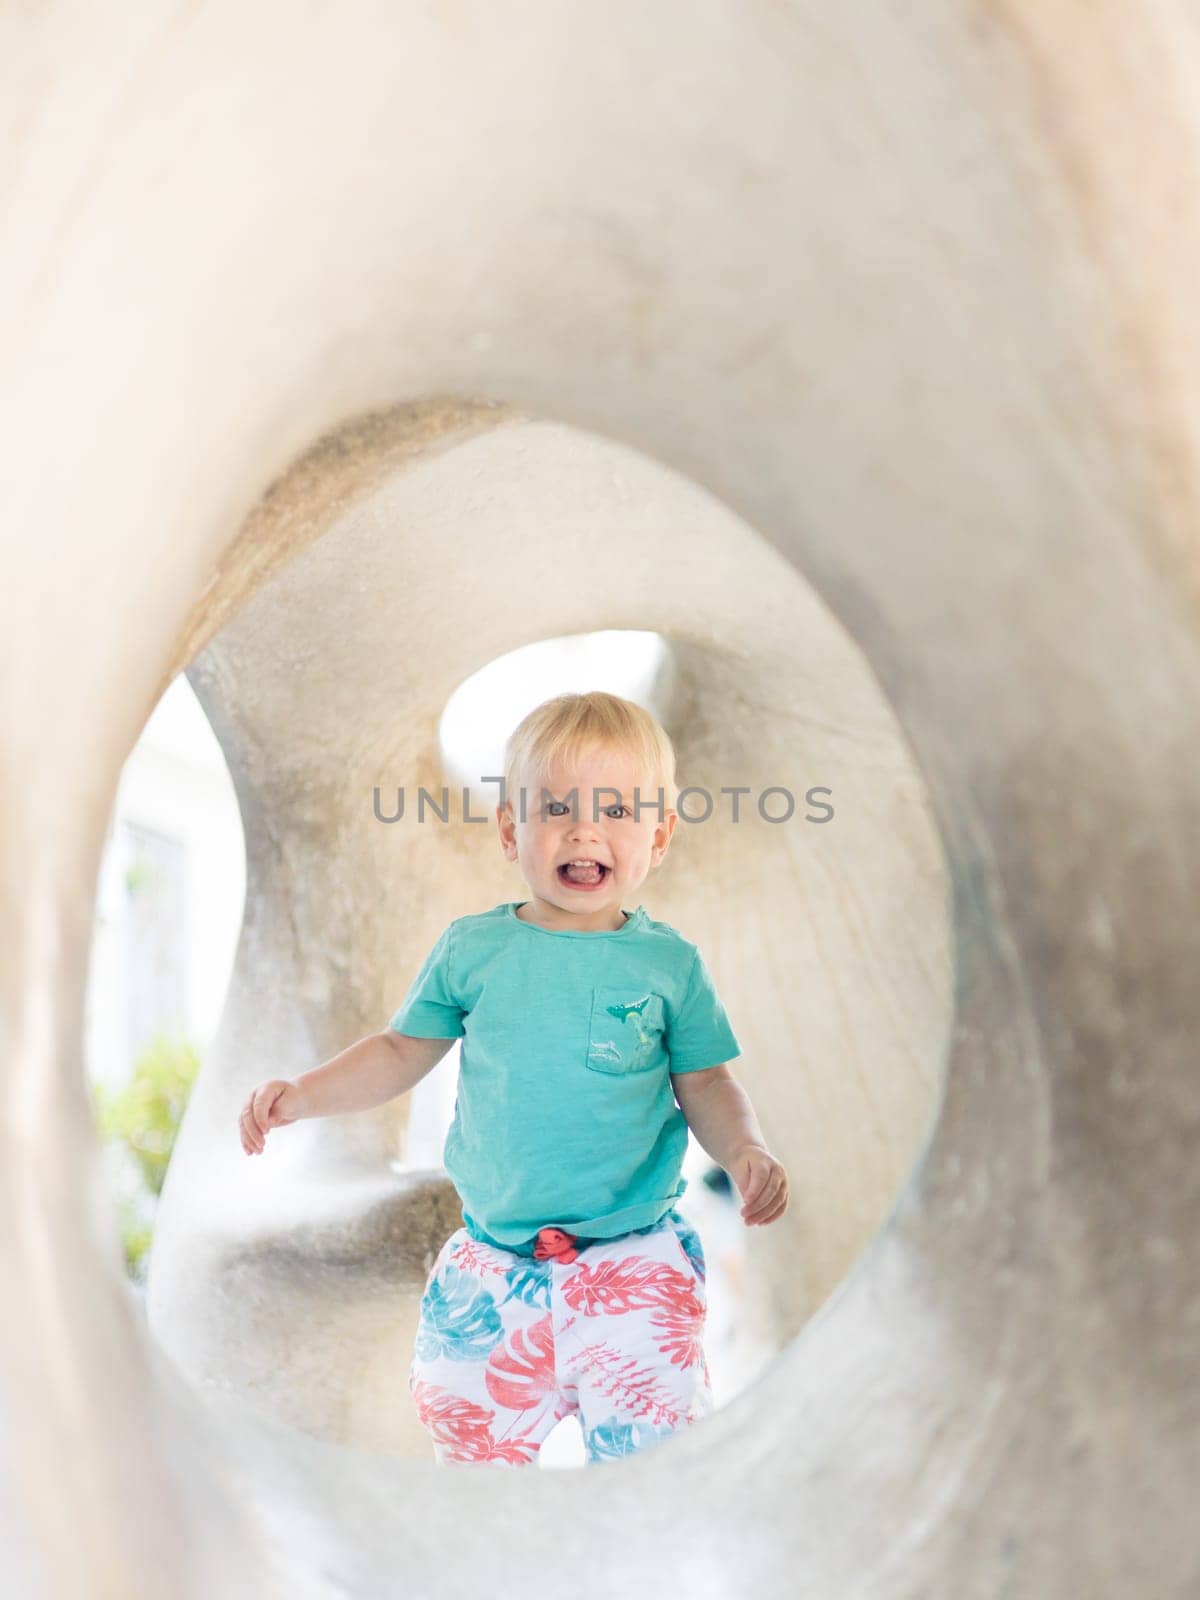 Child playing on outdoor playground. Toddler plays on school or kindergarten yard. Active kid on stone sculpured slide. Healthy summer activity for children. Little boy climbing outdoors